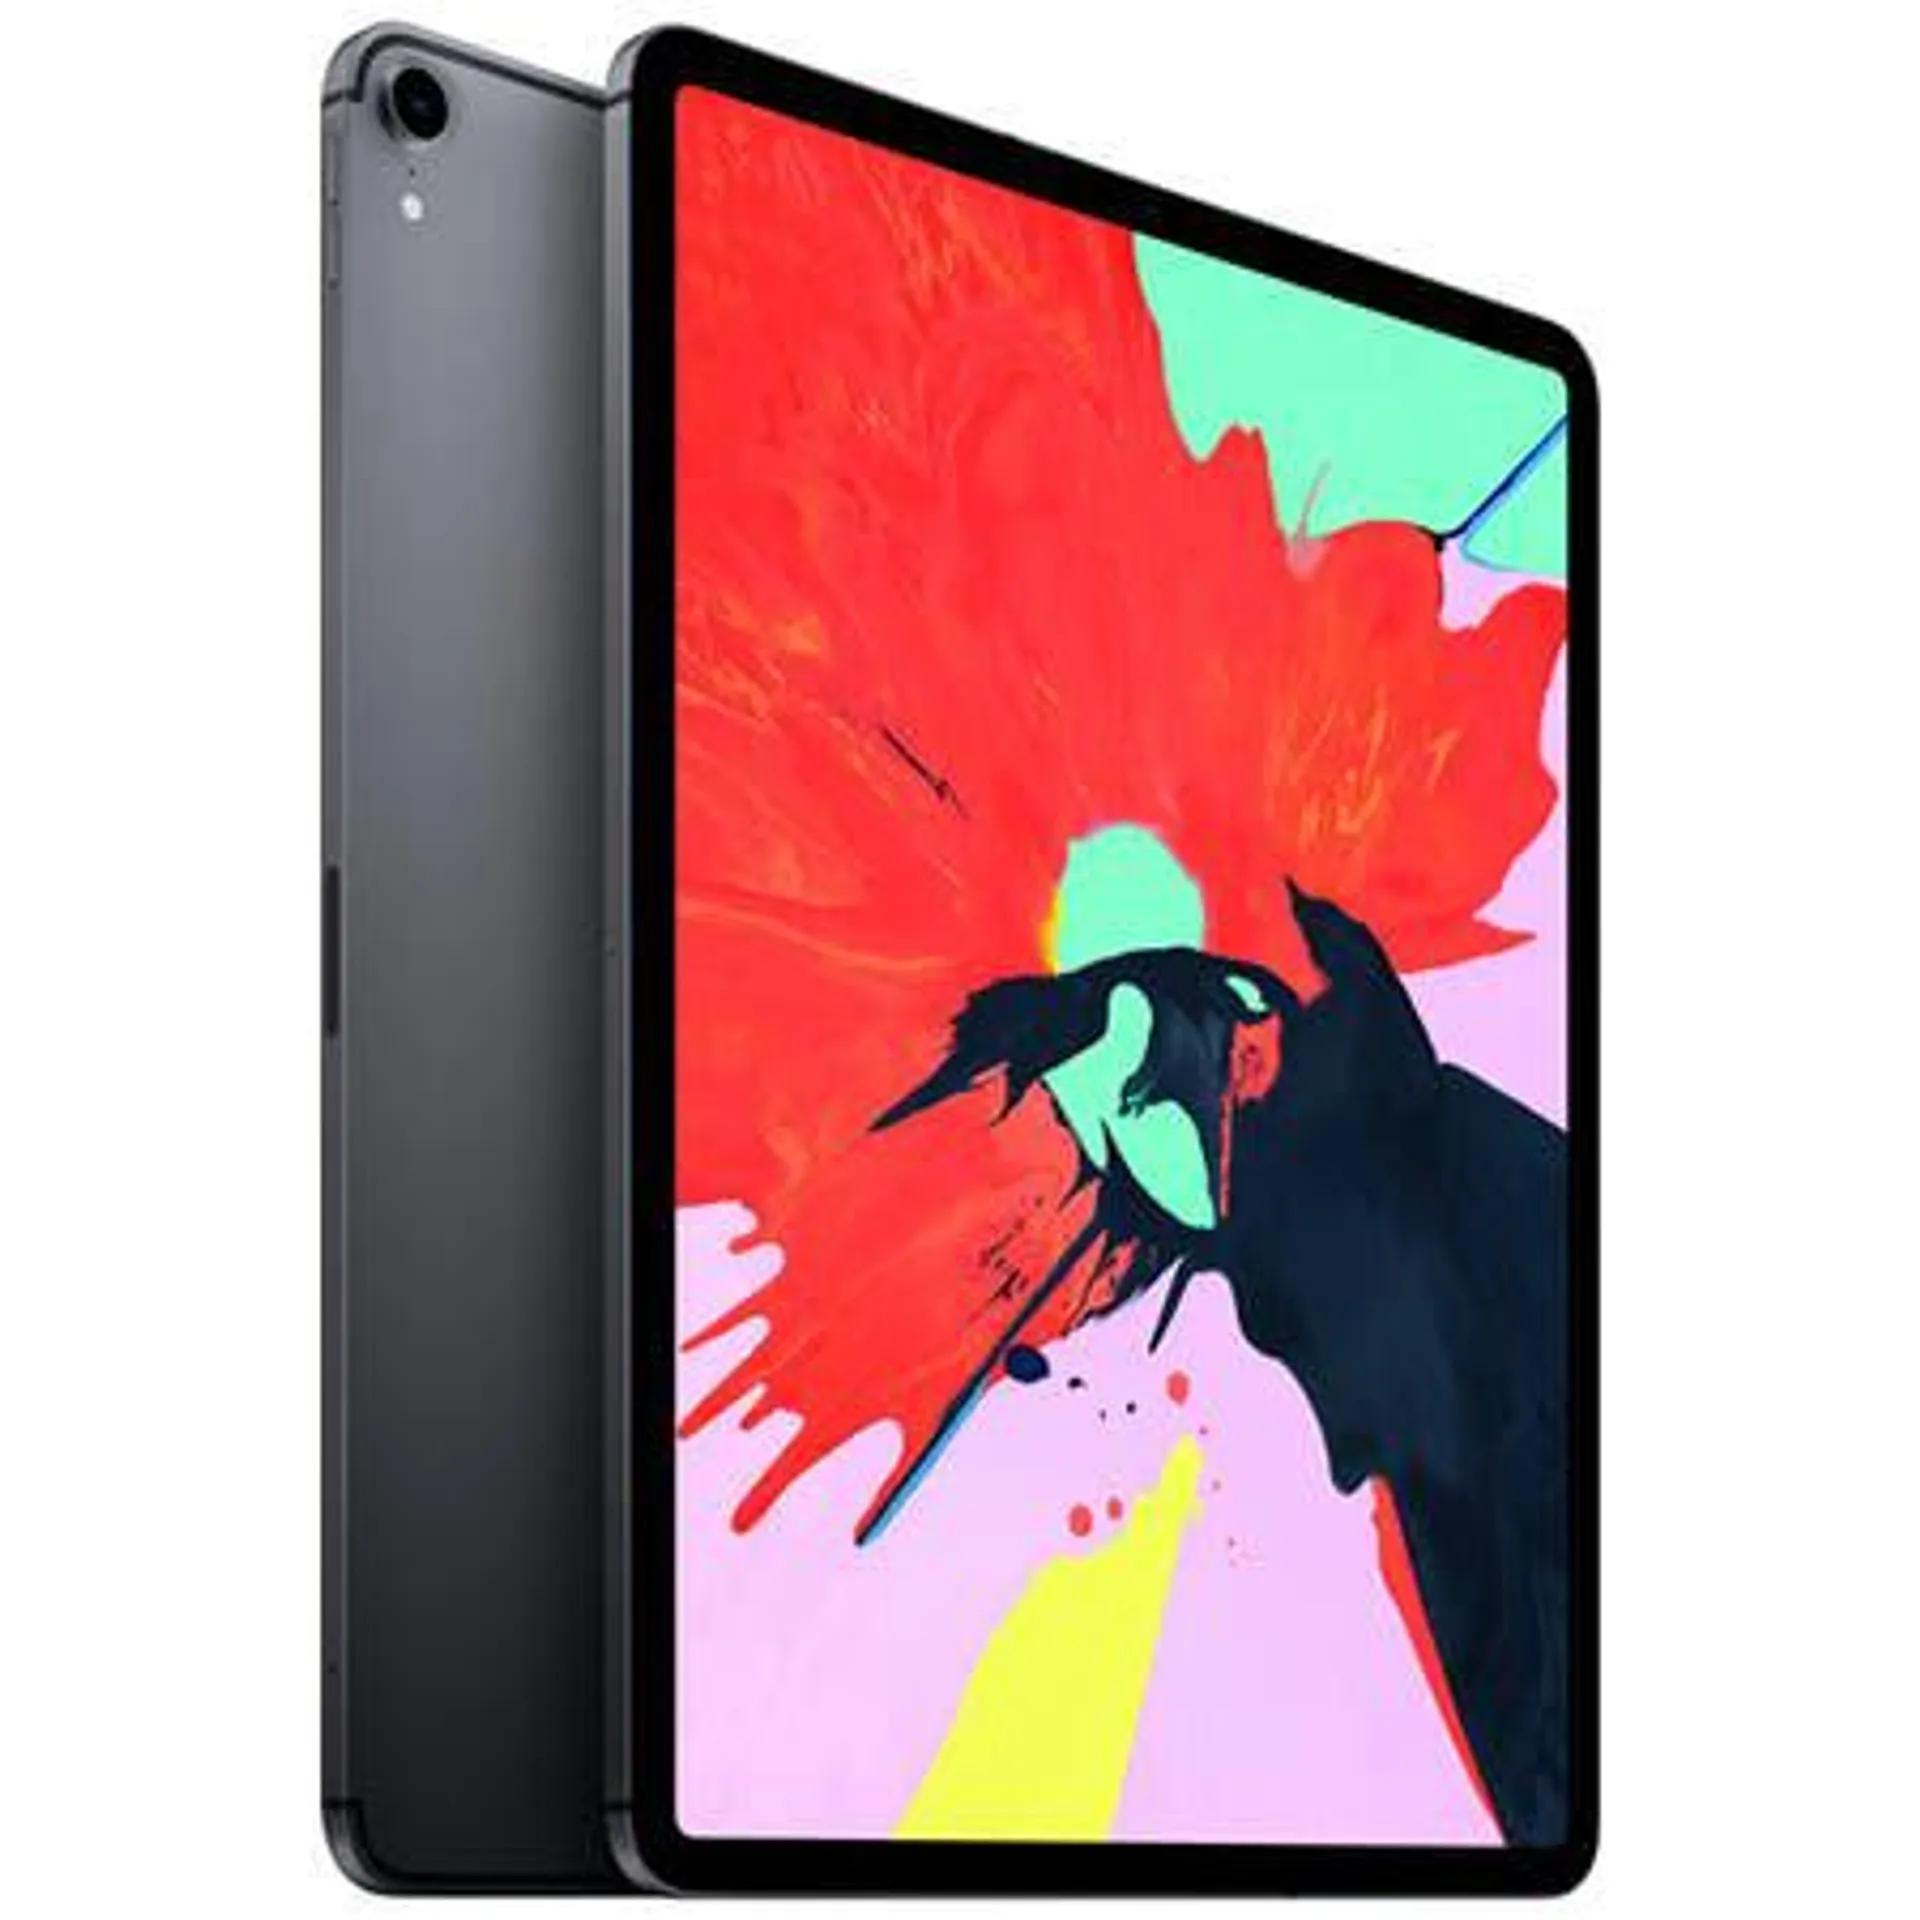 IPAD PRO 3 2018 CELL A1895 GRIS SIDERAL 256 GO Neuf ou reconditionné